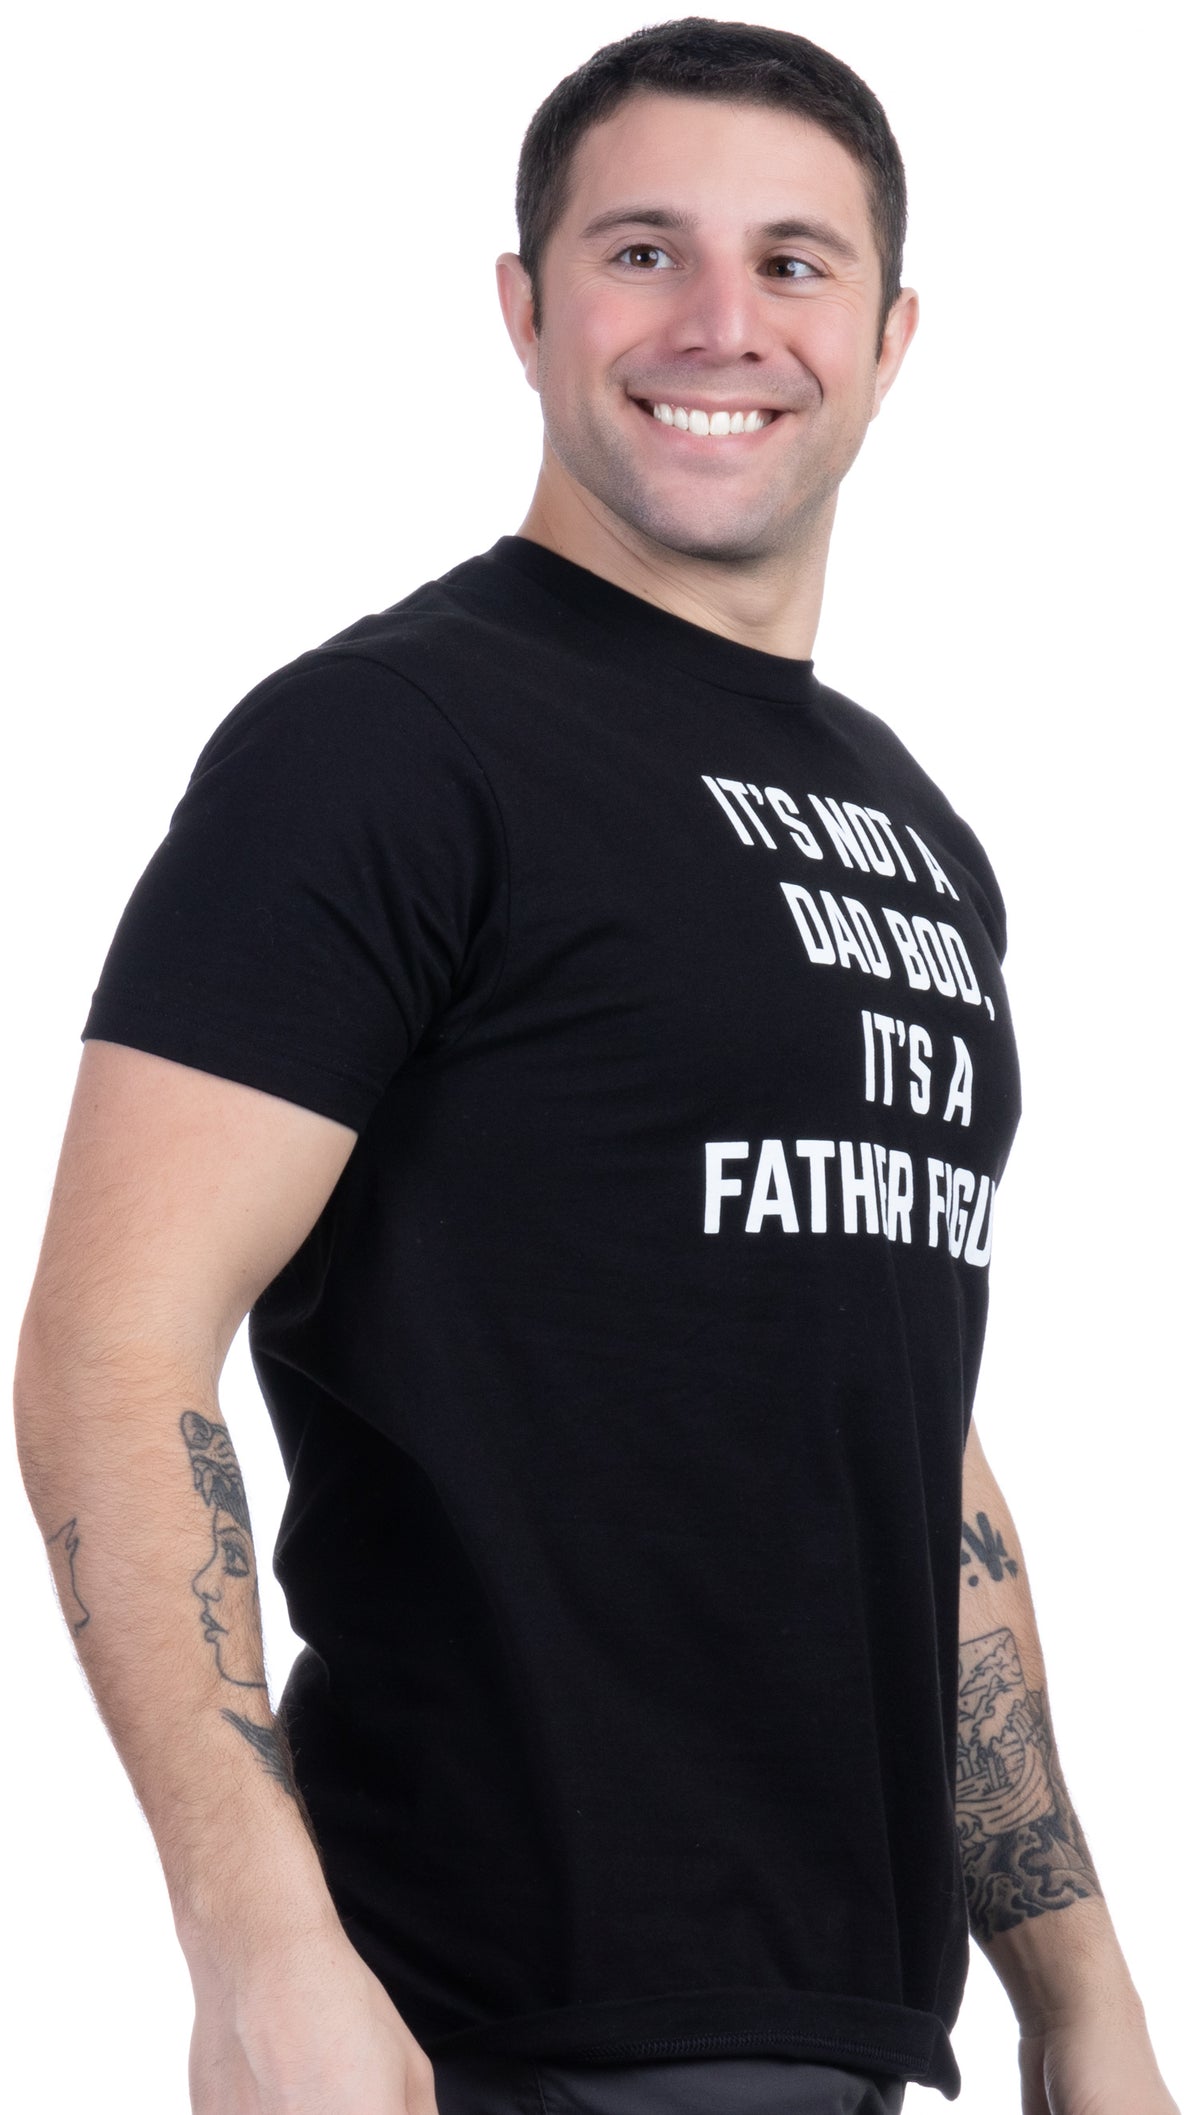 It's not a Dad BOD, It's a Father Figure | Funny Tee Shirt, Sarcastic Saying Humor Joke T-Shirt for Men Grandpa Daddy